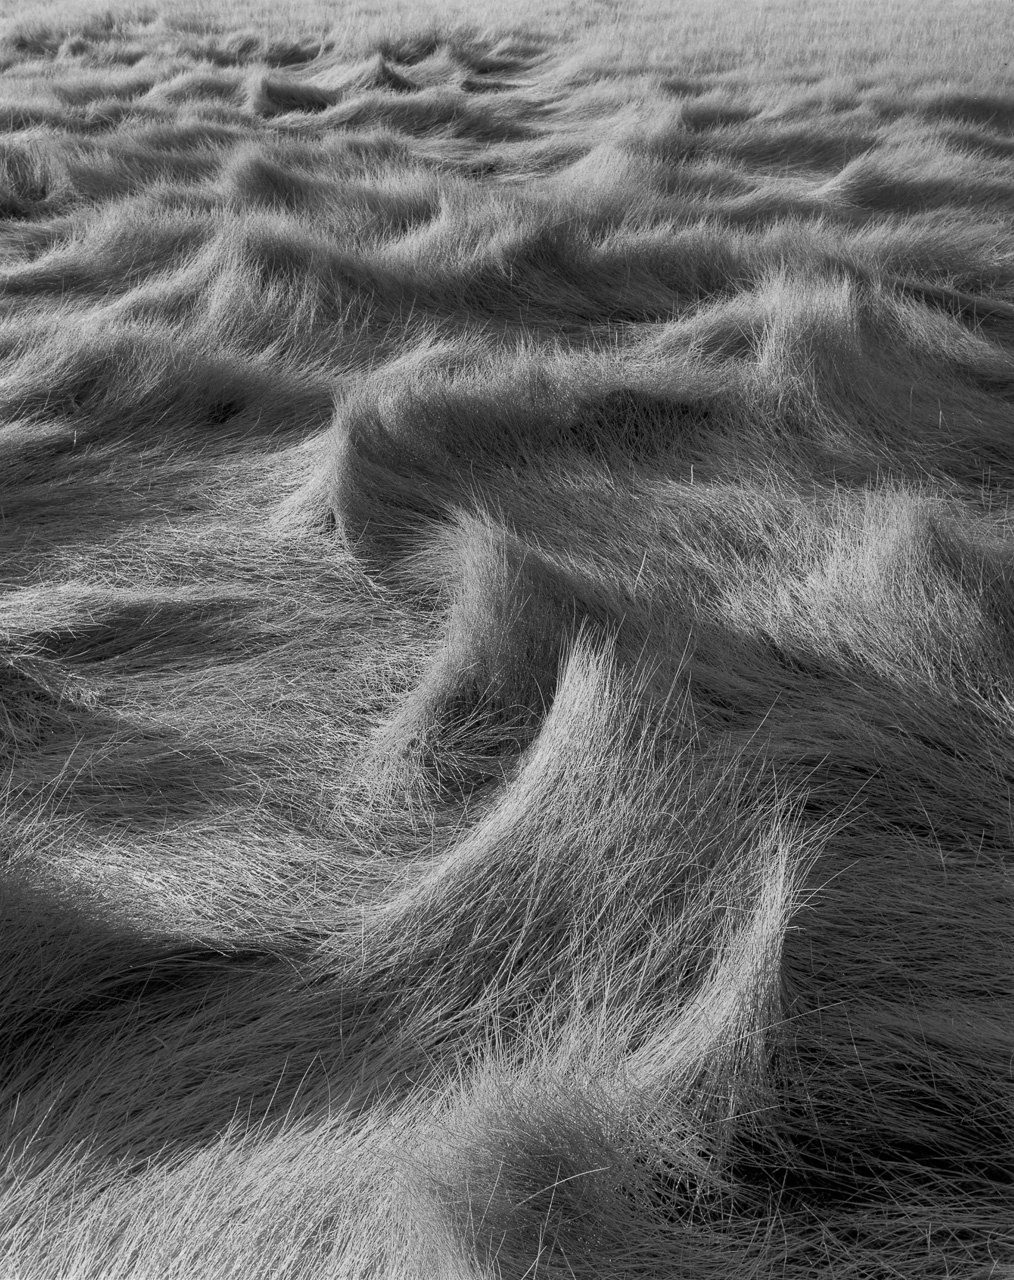 A black-and-white photograph represents a close up view of a salt hay that fills up the entire space. Values and shades of black and white portray the movement and texture of salt hay significantly.